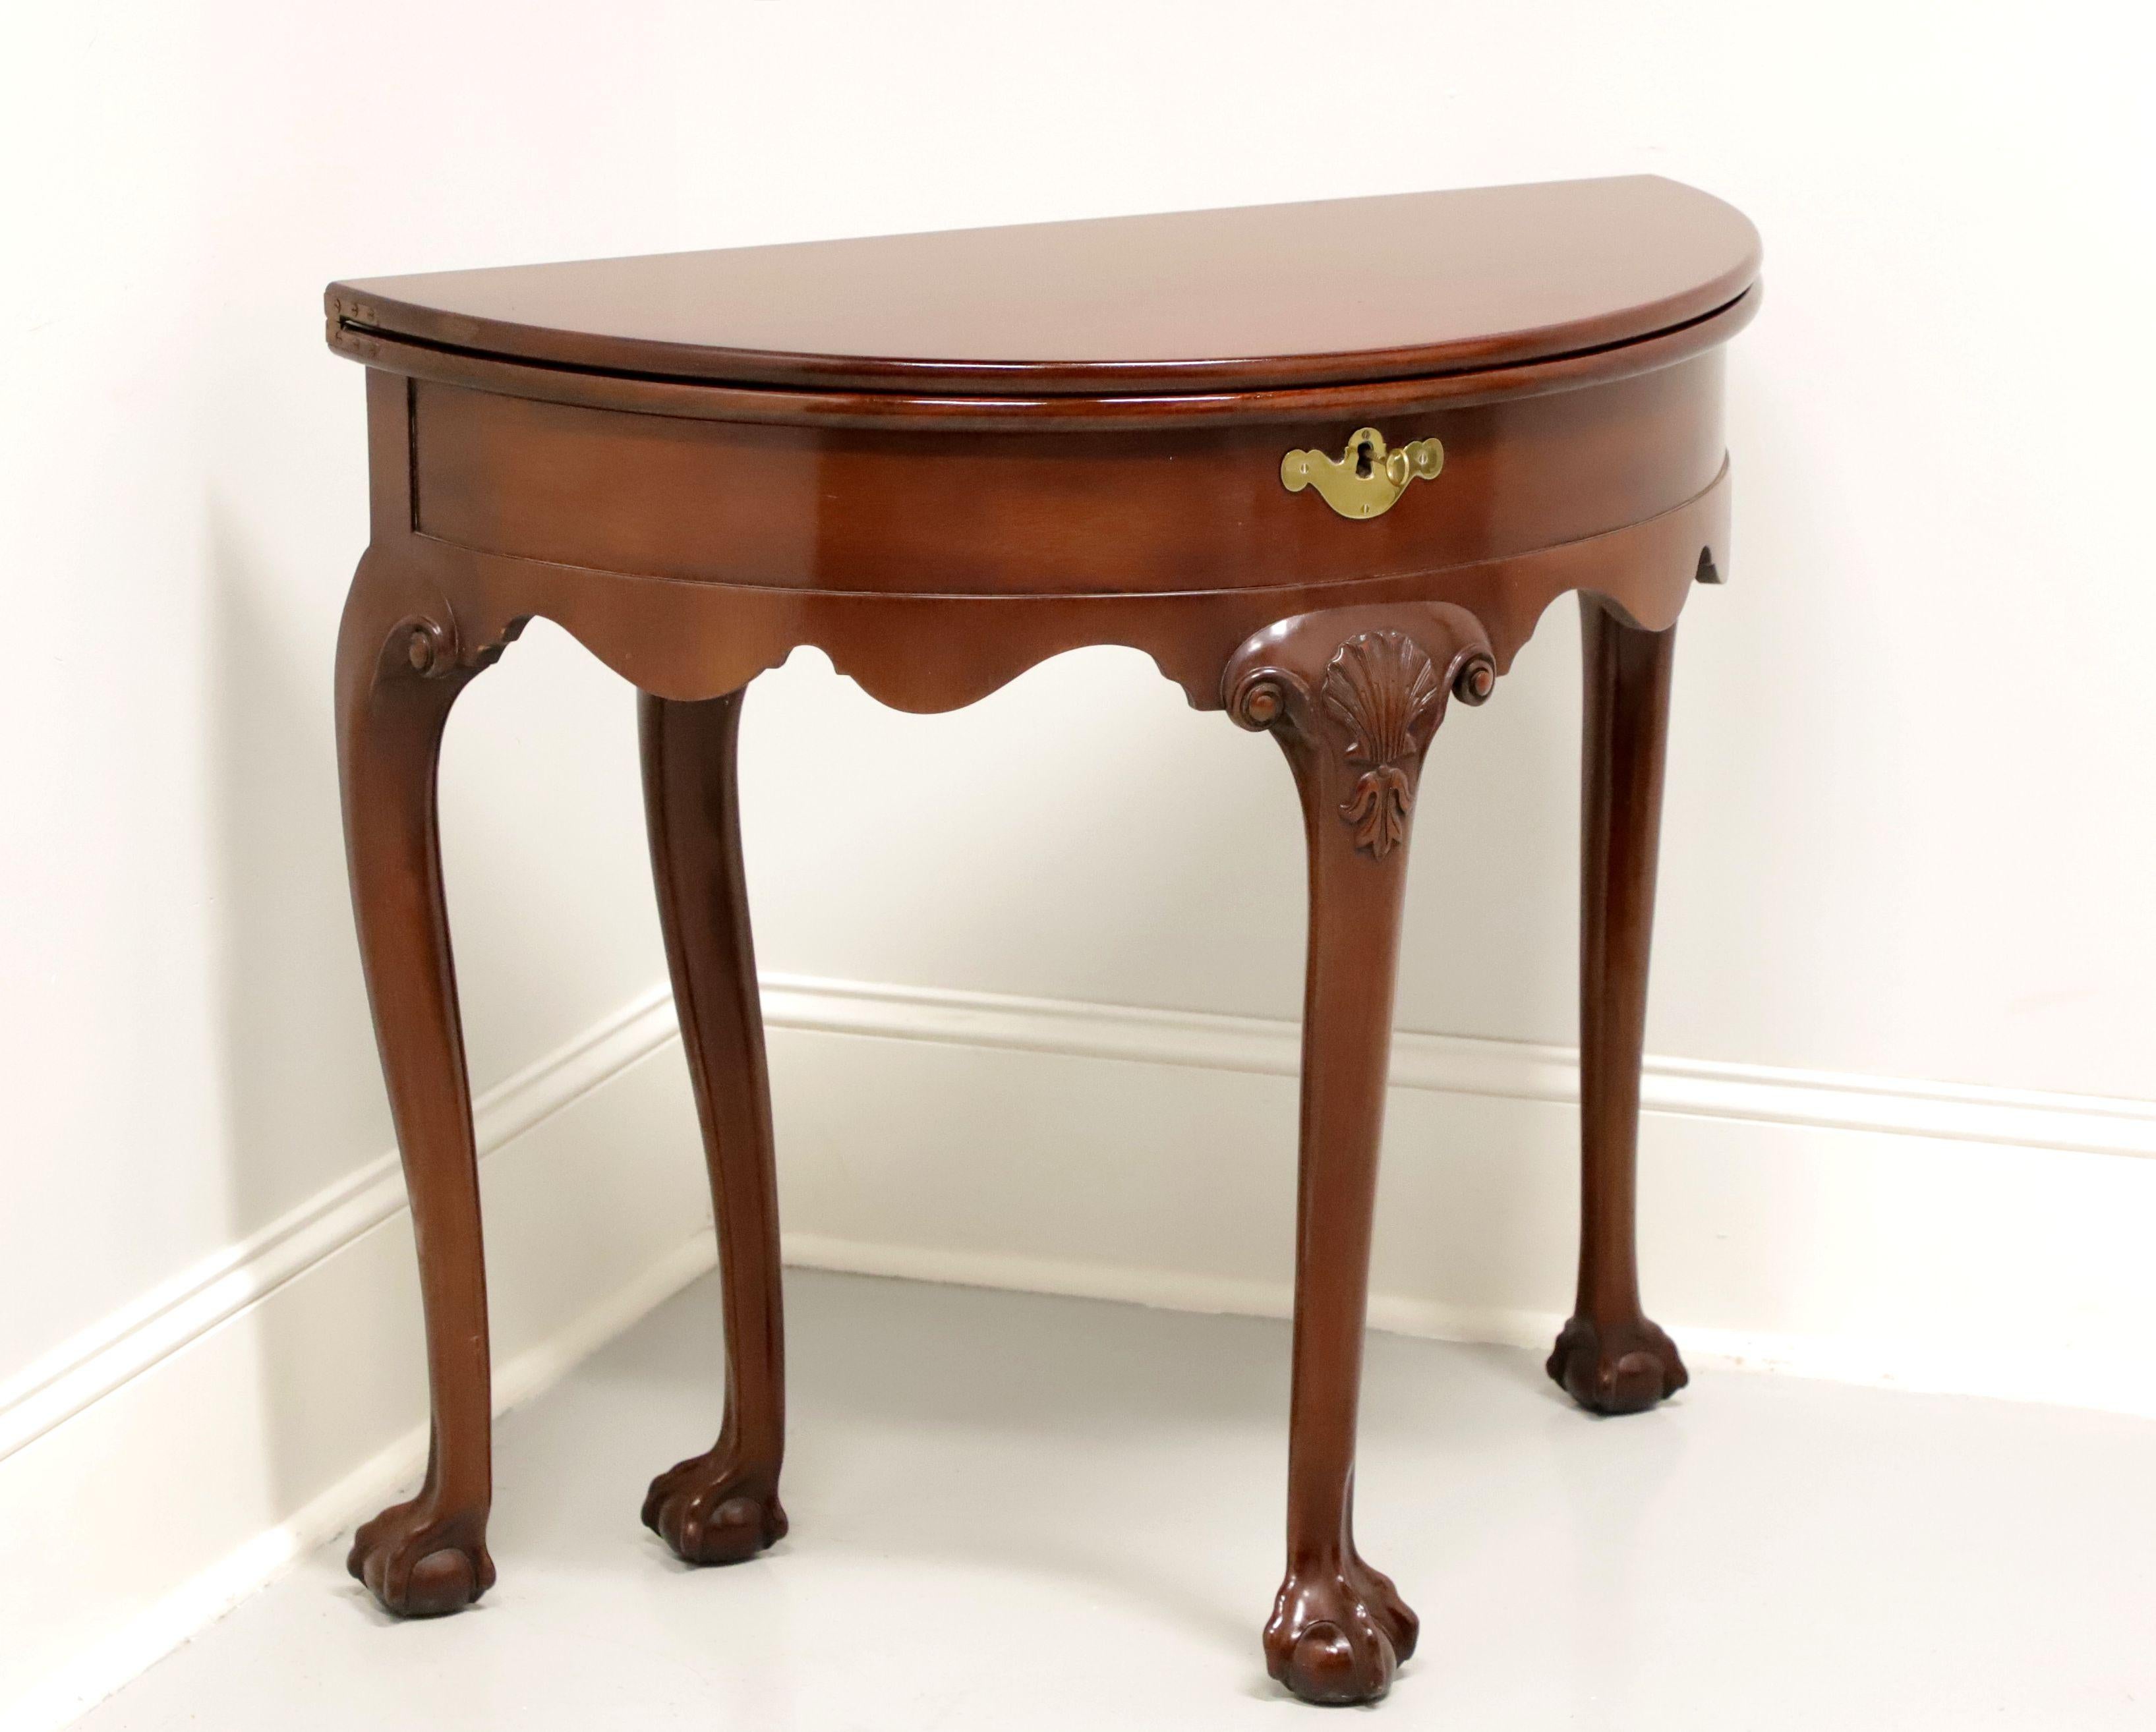 A Georgian style flip-top demilune table by Kittinger Furniture, an authorized reproduction of a Colonial Williamsburg piece. Solid mahogany, brass lock escutcheon, bow front, carved apron, carved knees and ball in claw feet. Back gateleg swings out